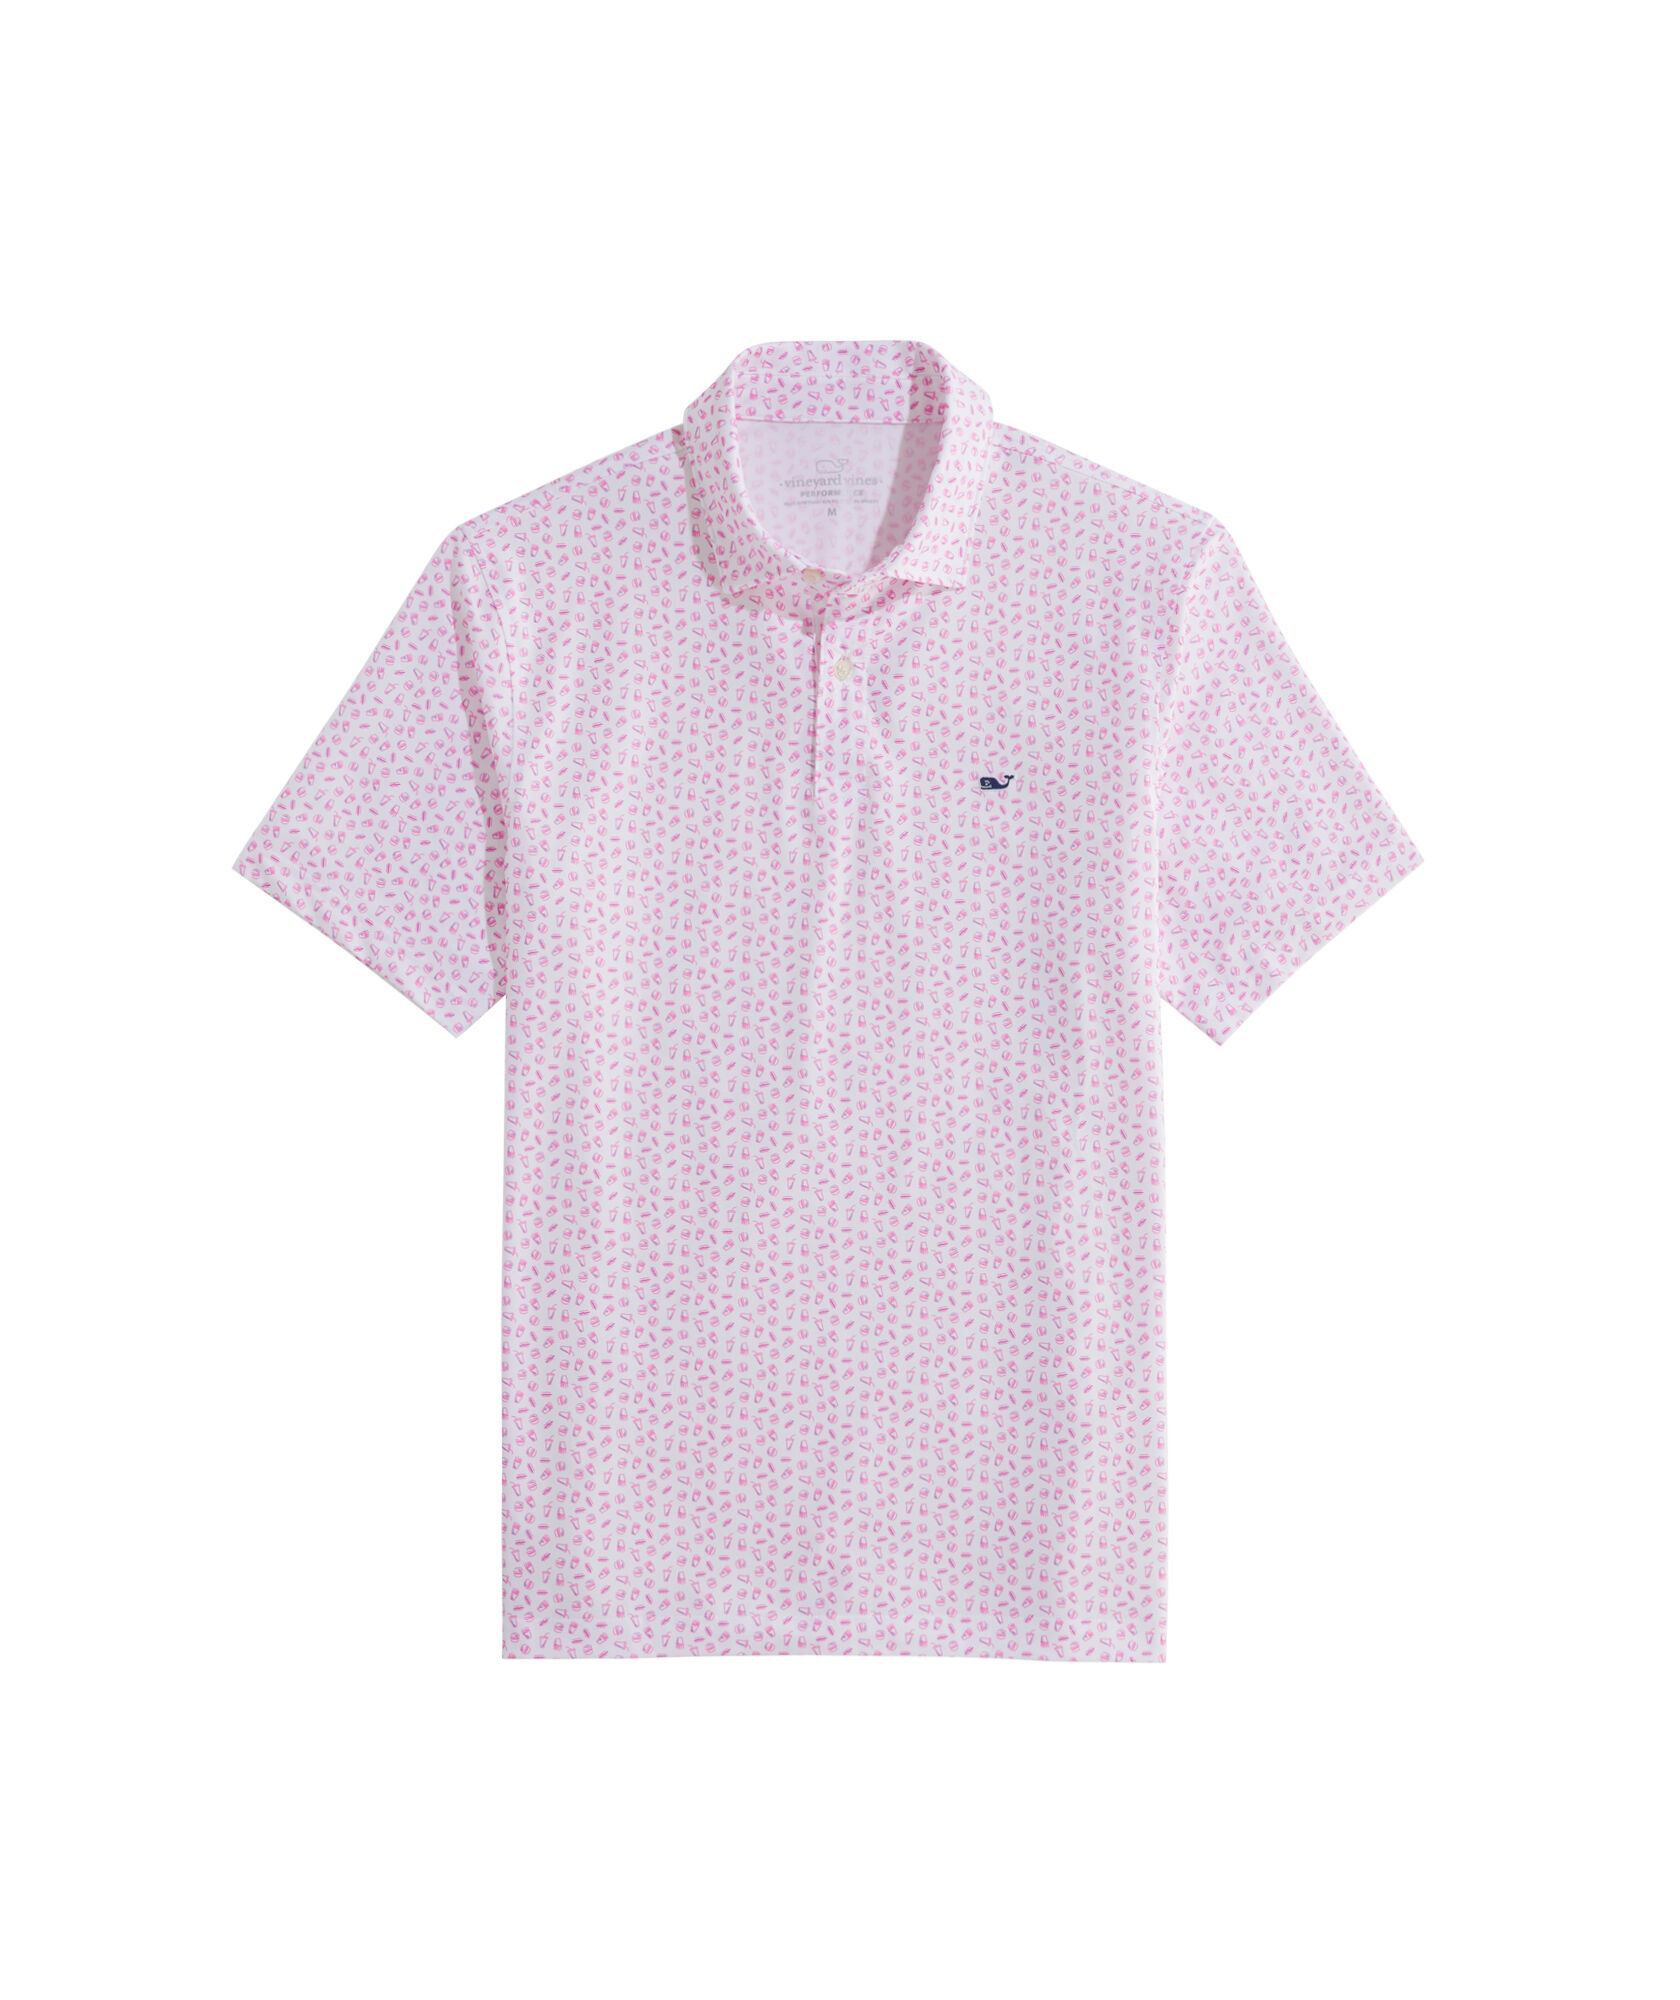 OUTLET Boys' Printed Performance Polo